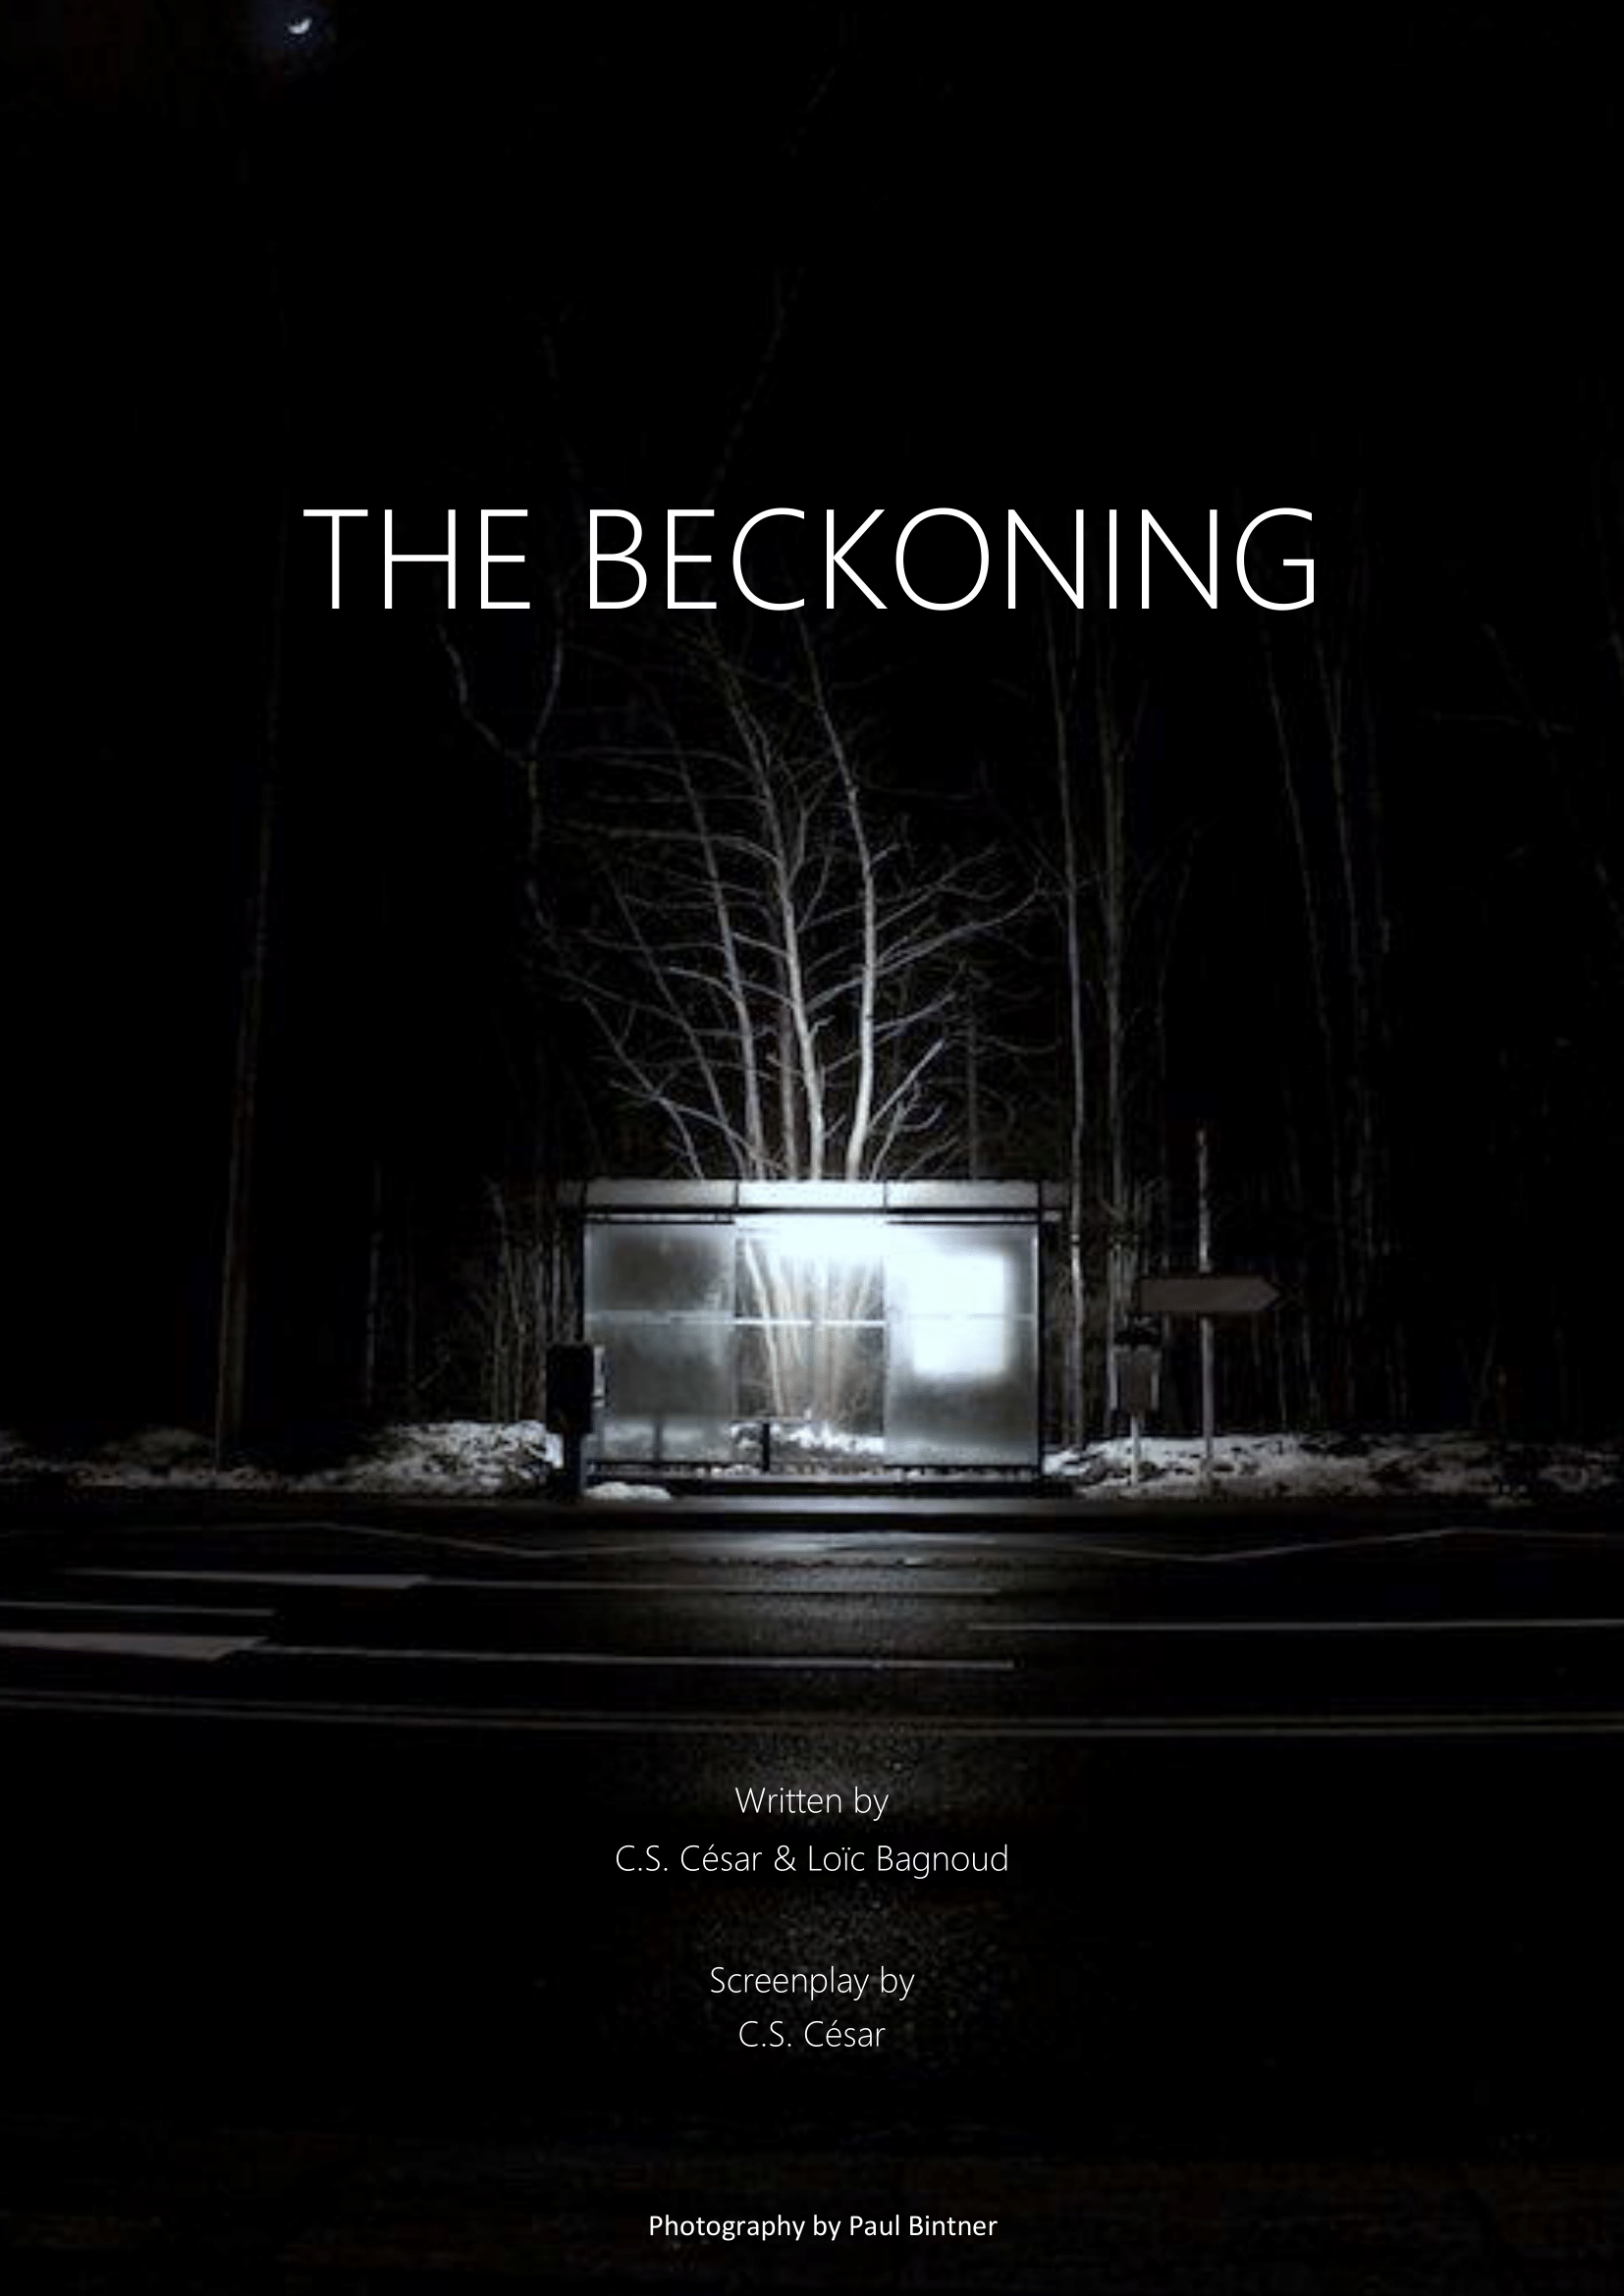 THE BECKONING